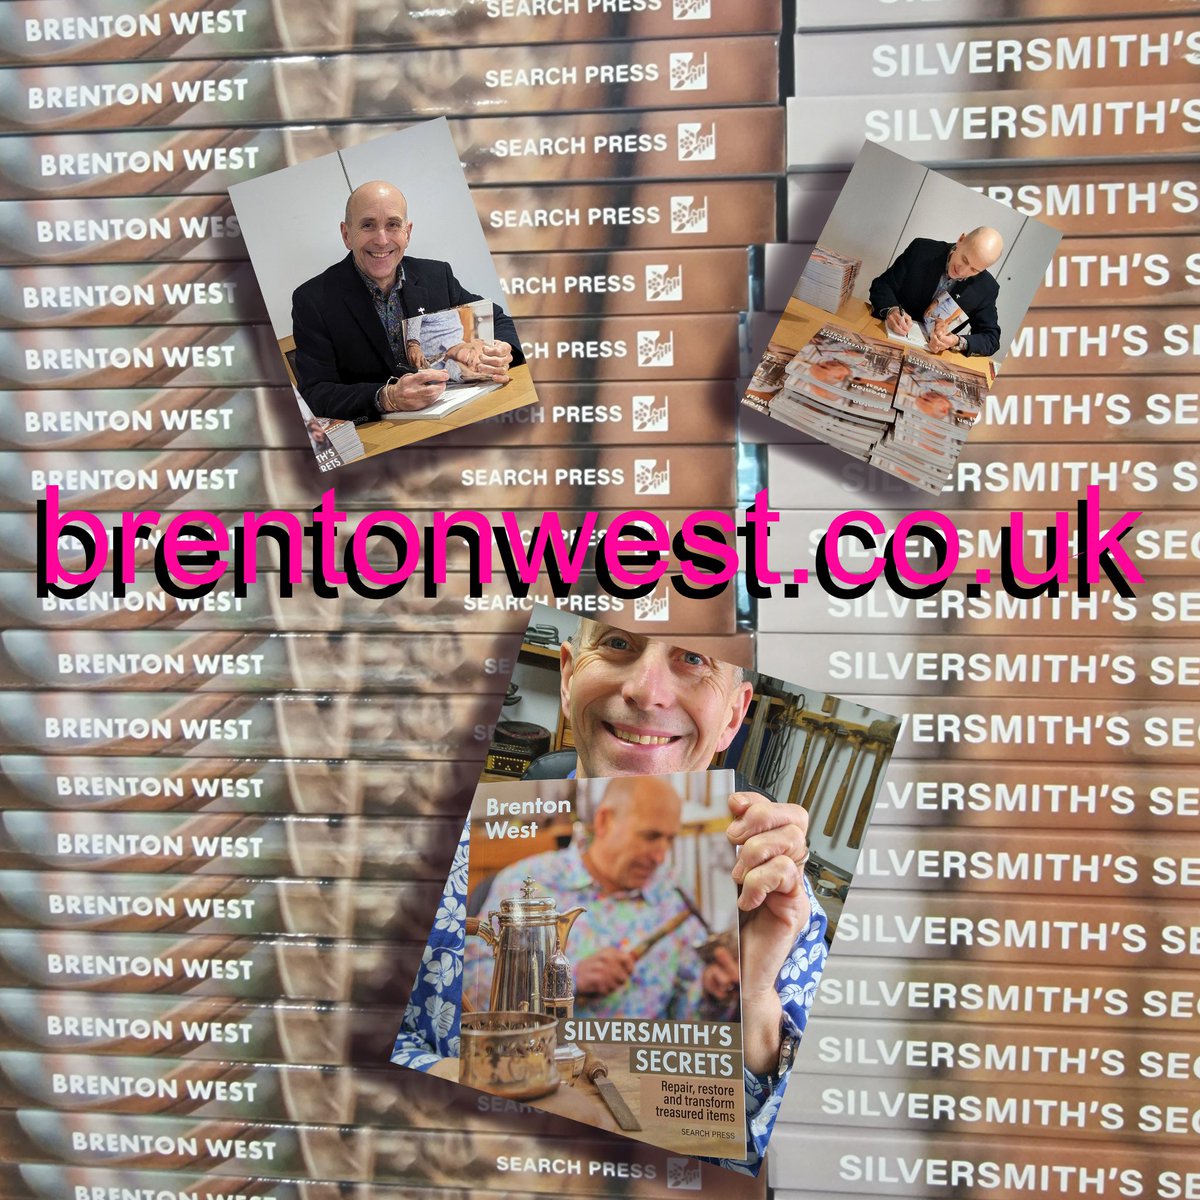 Signed copies of my book Silversmith’s Secrets available to buy through my website. For added fun, 1 book in this bunch has a small symbol drawn by my signature. Whoever gets that book, contact me with a picture of the symbol. You will win either silver dragonfly earrings or pin